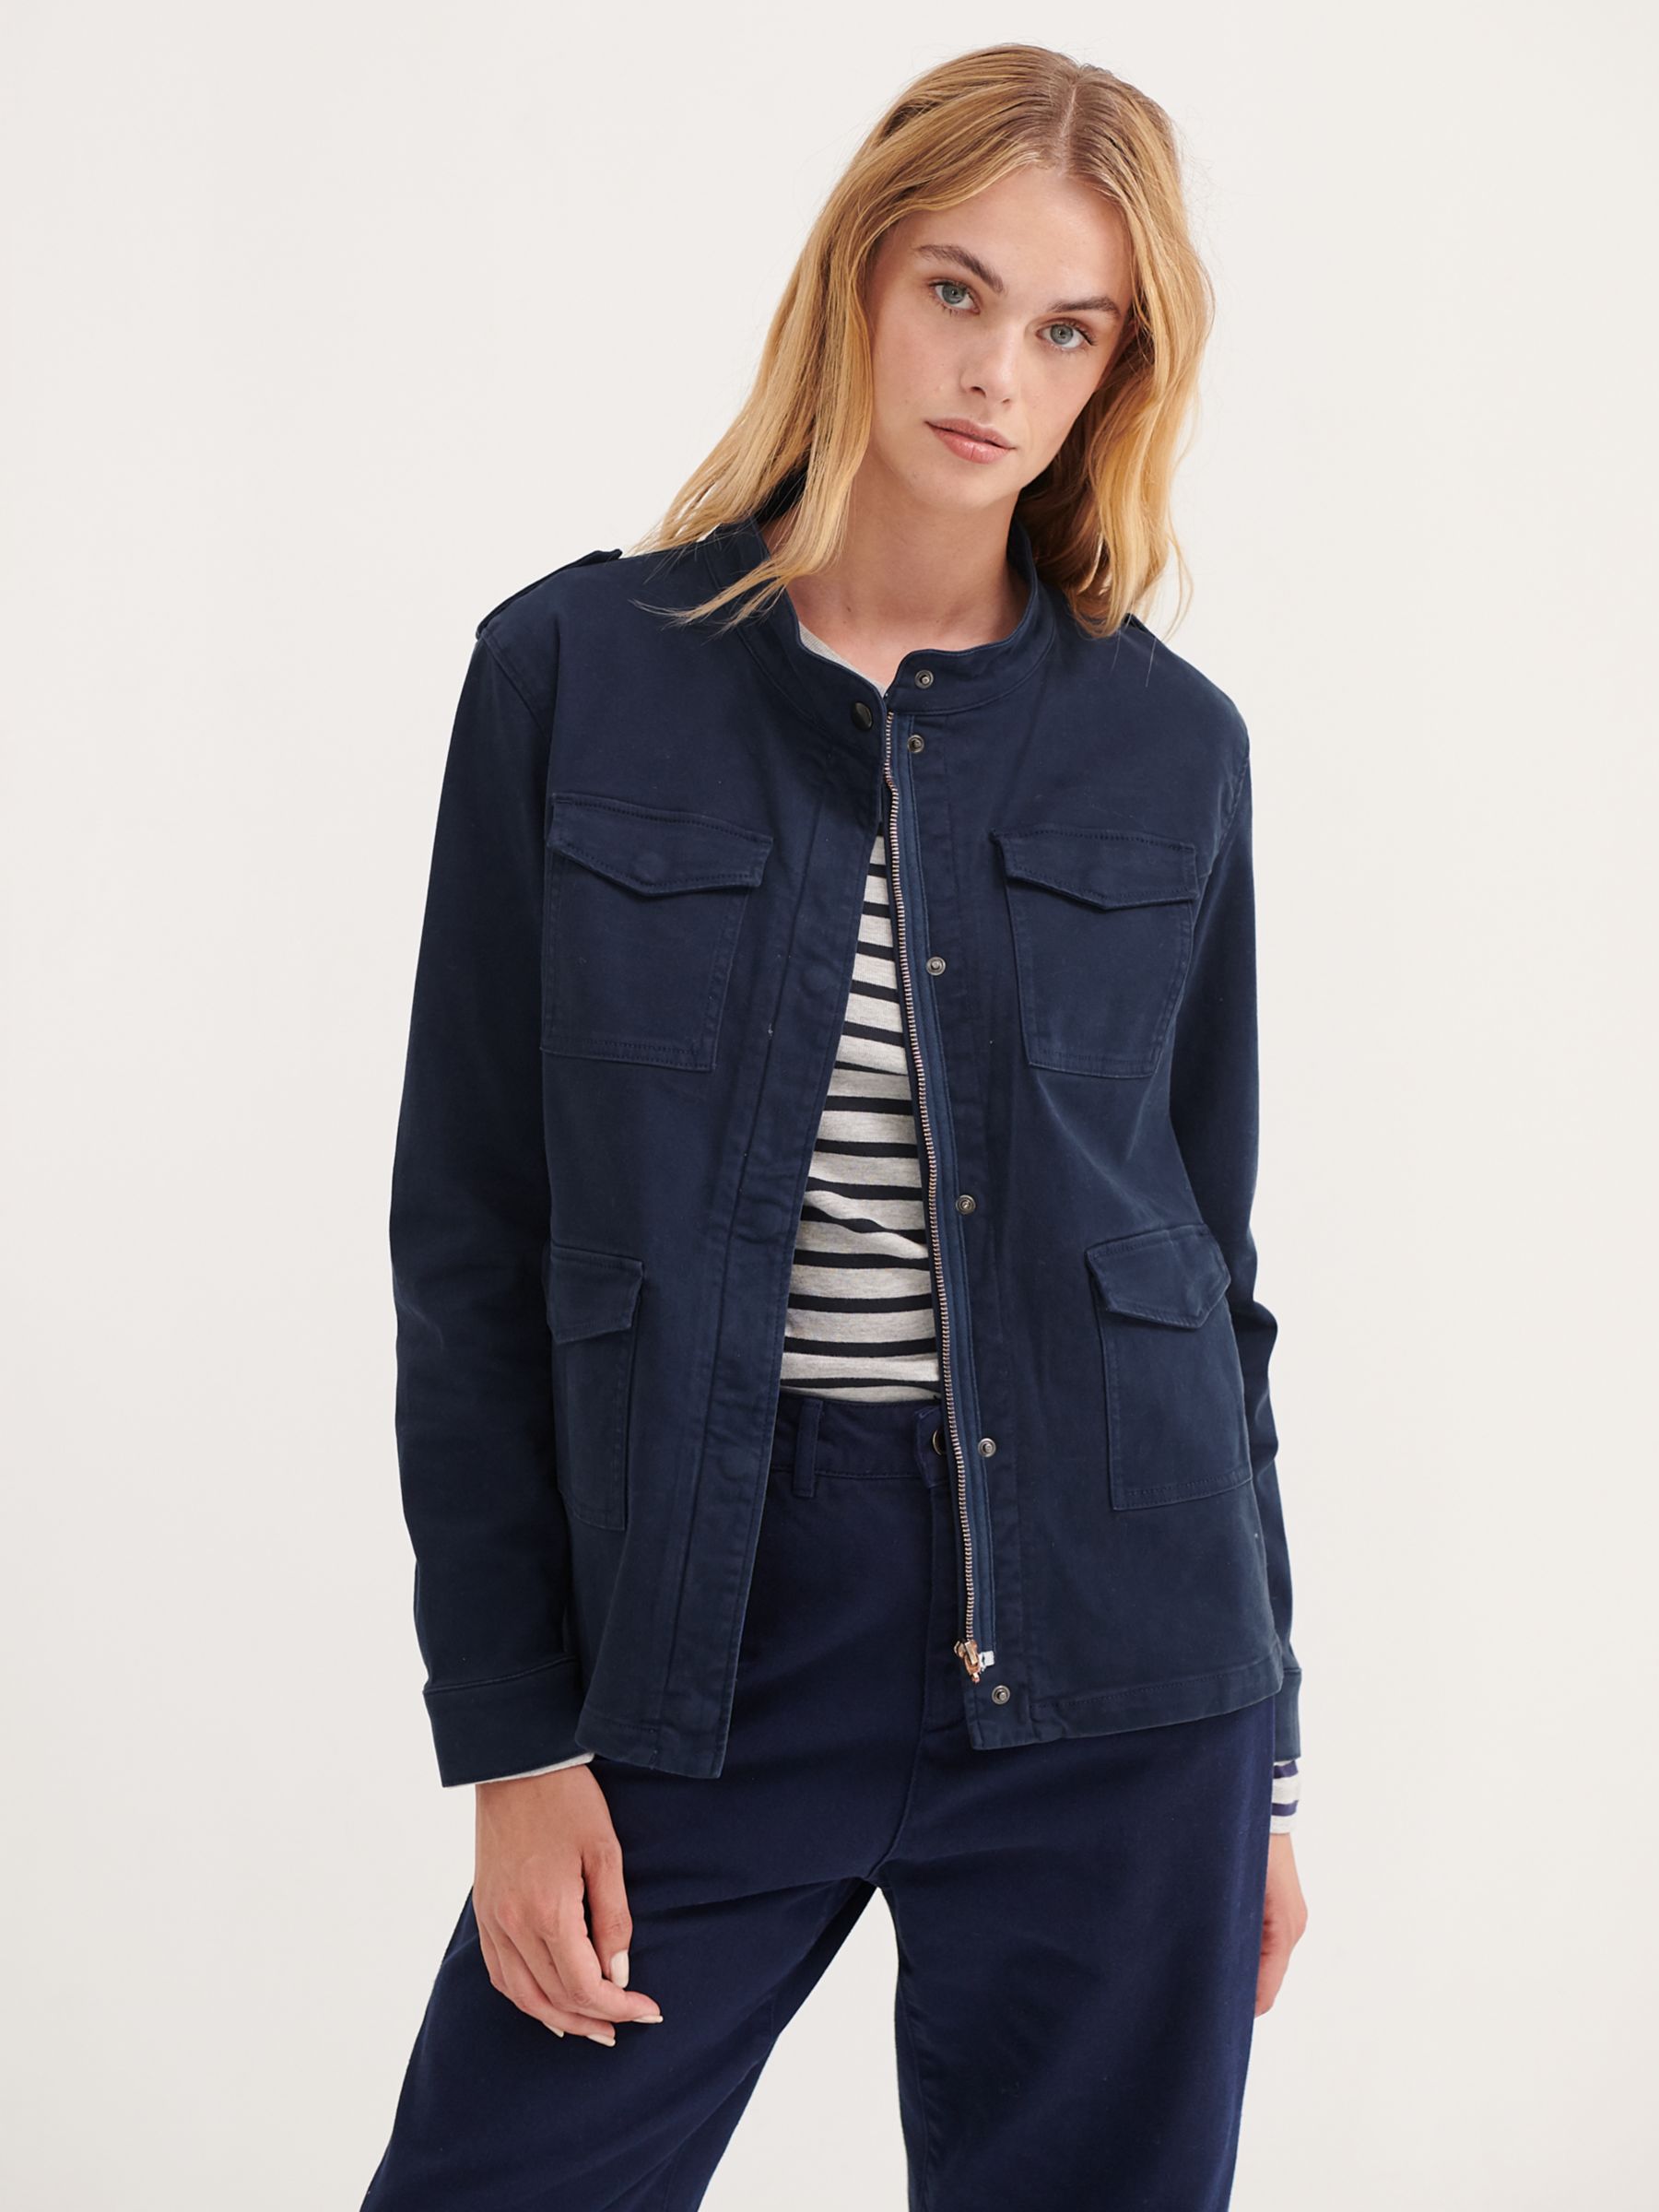 NRBY Monica Cotton Utility Jacket, Navy at John Lewis & Partners